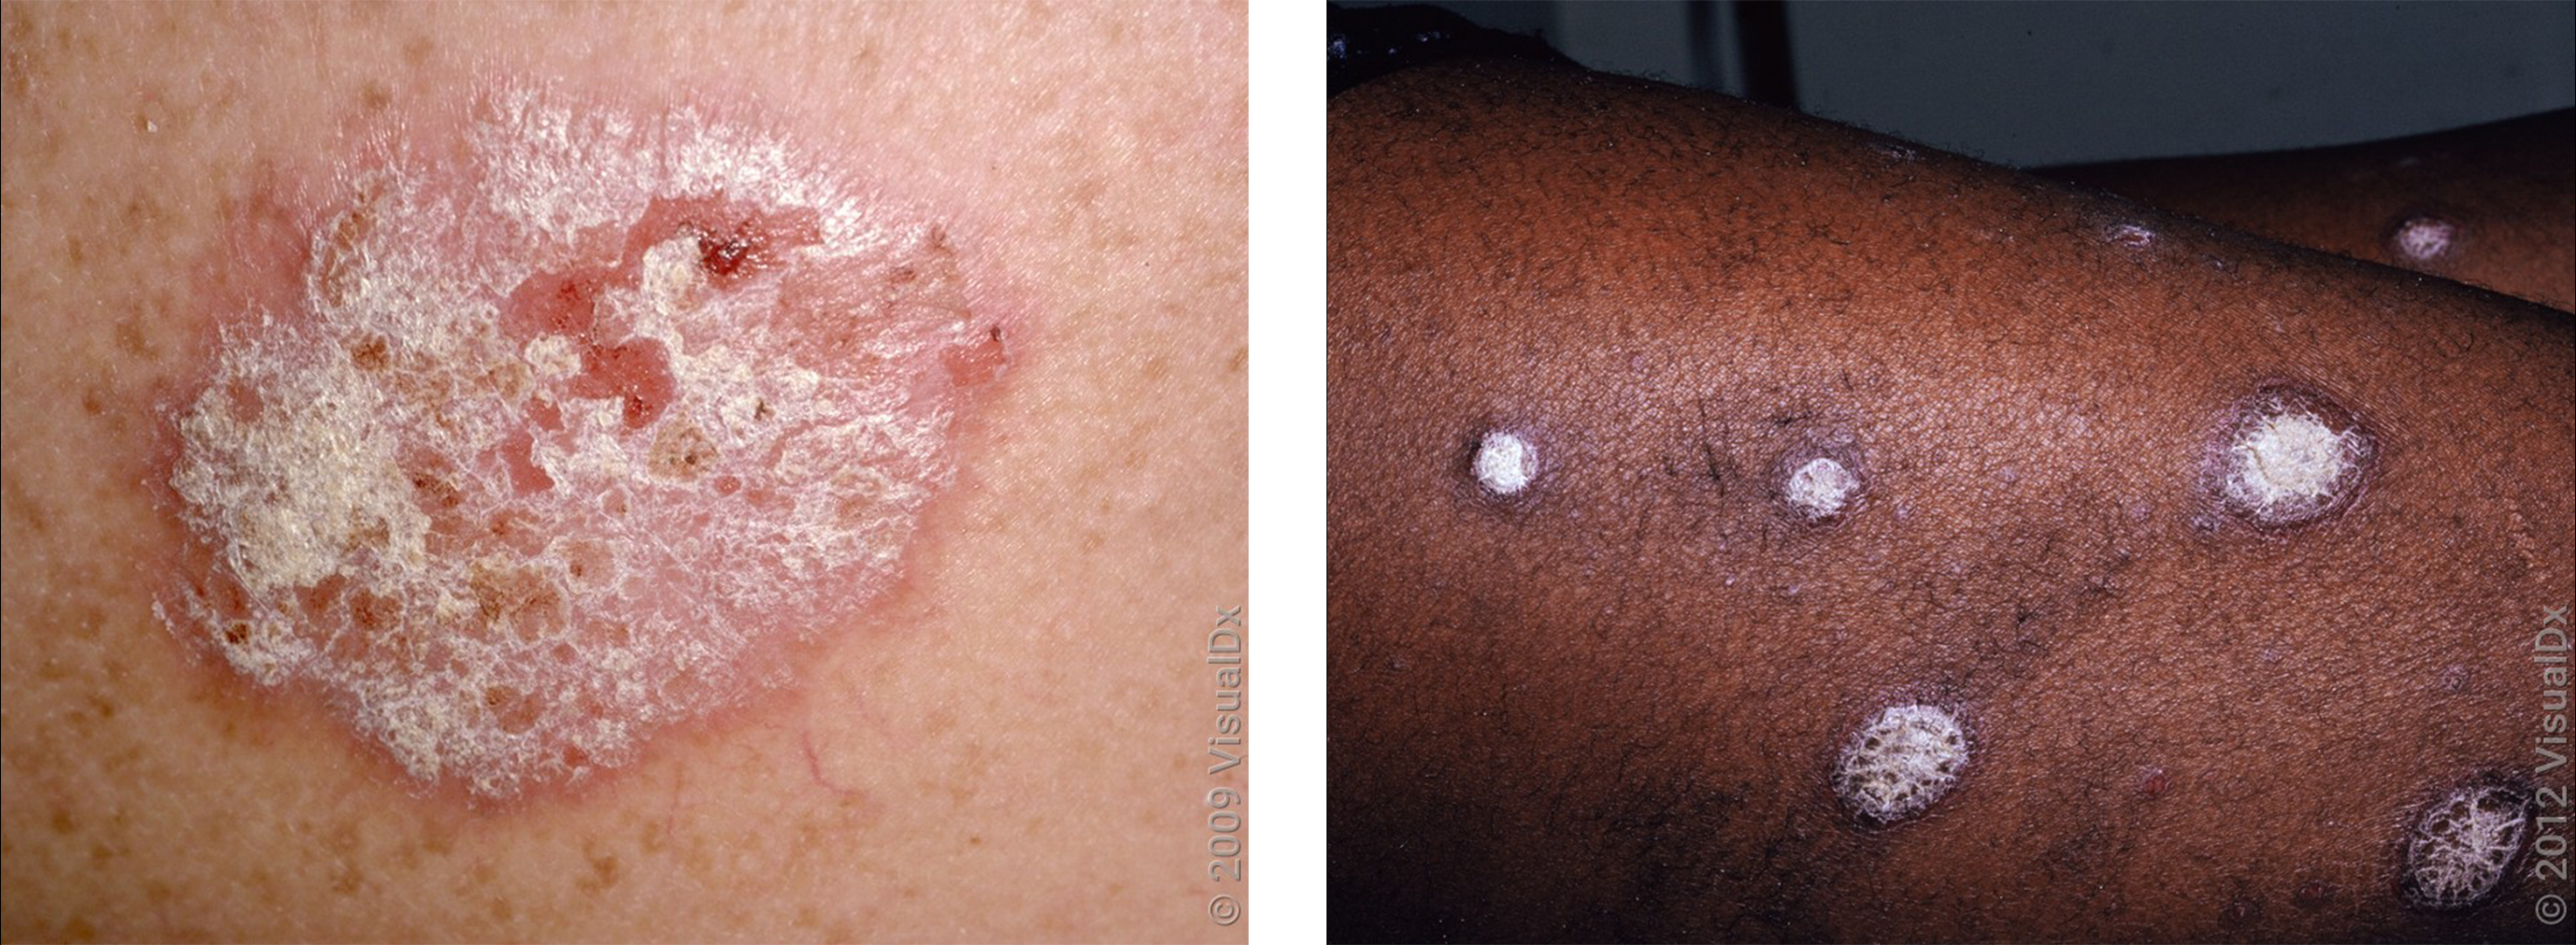 Left: A pink and scaly patch on the skin from psoriasis. Right: Thick, brown-violet round and scaly patches on the skin from psoriasis.